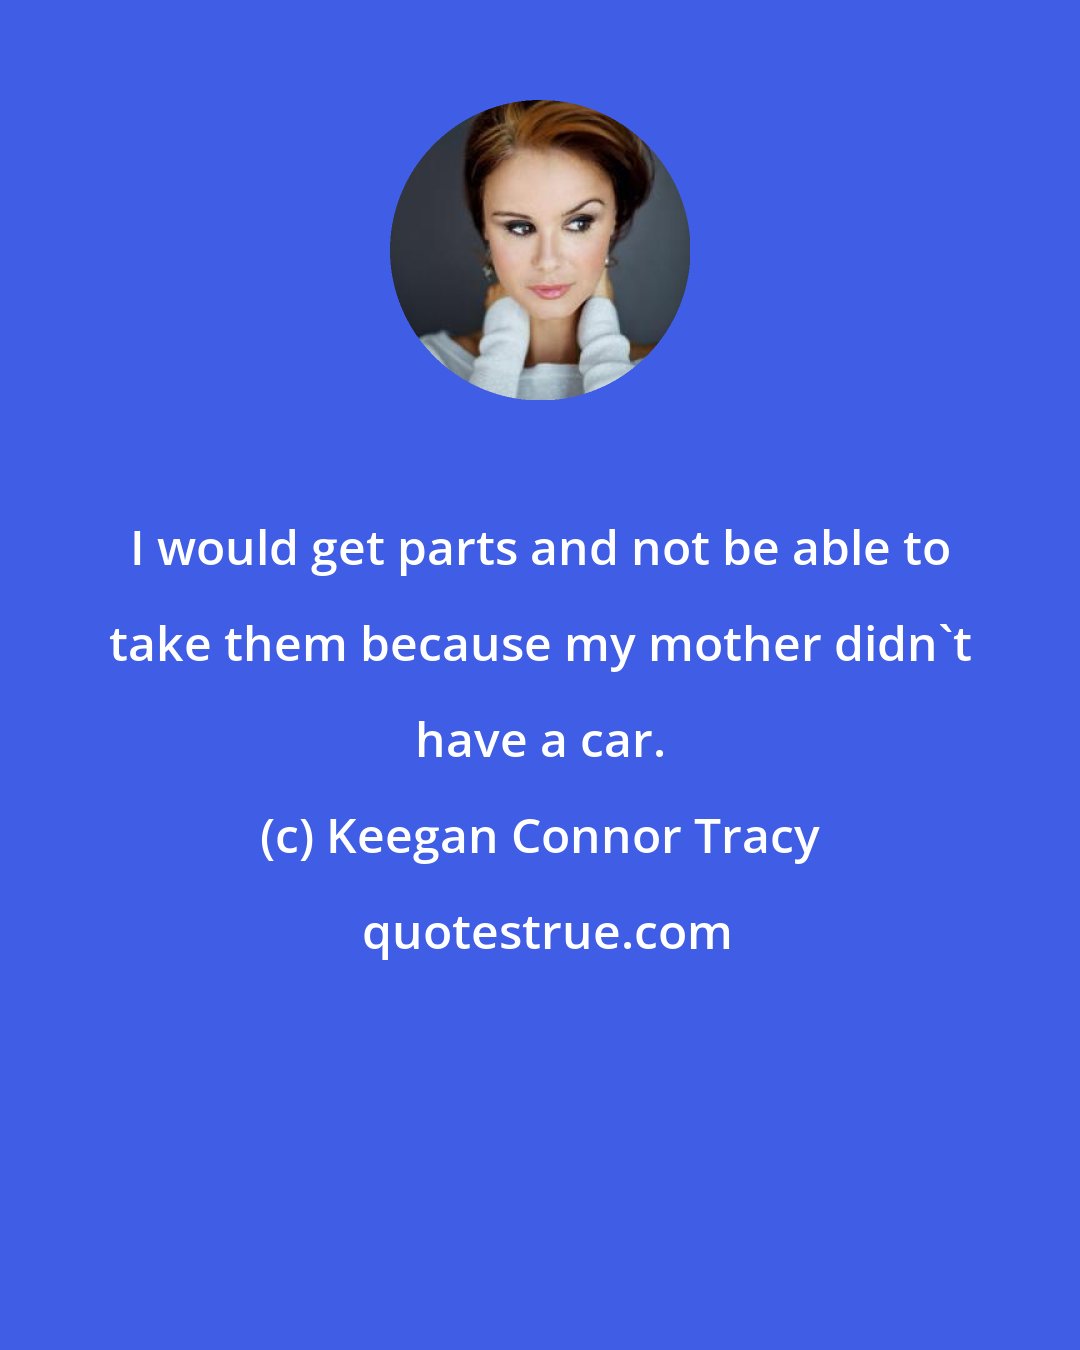 Keegan Connor Tracy: I would get parts and not be able to take them because my mother didn't have a car.